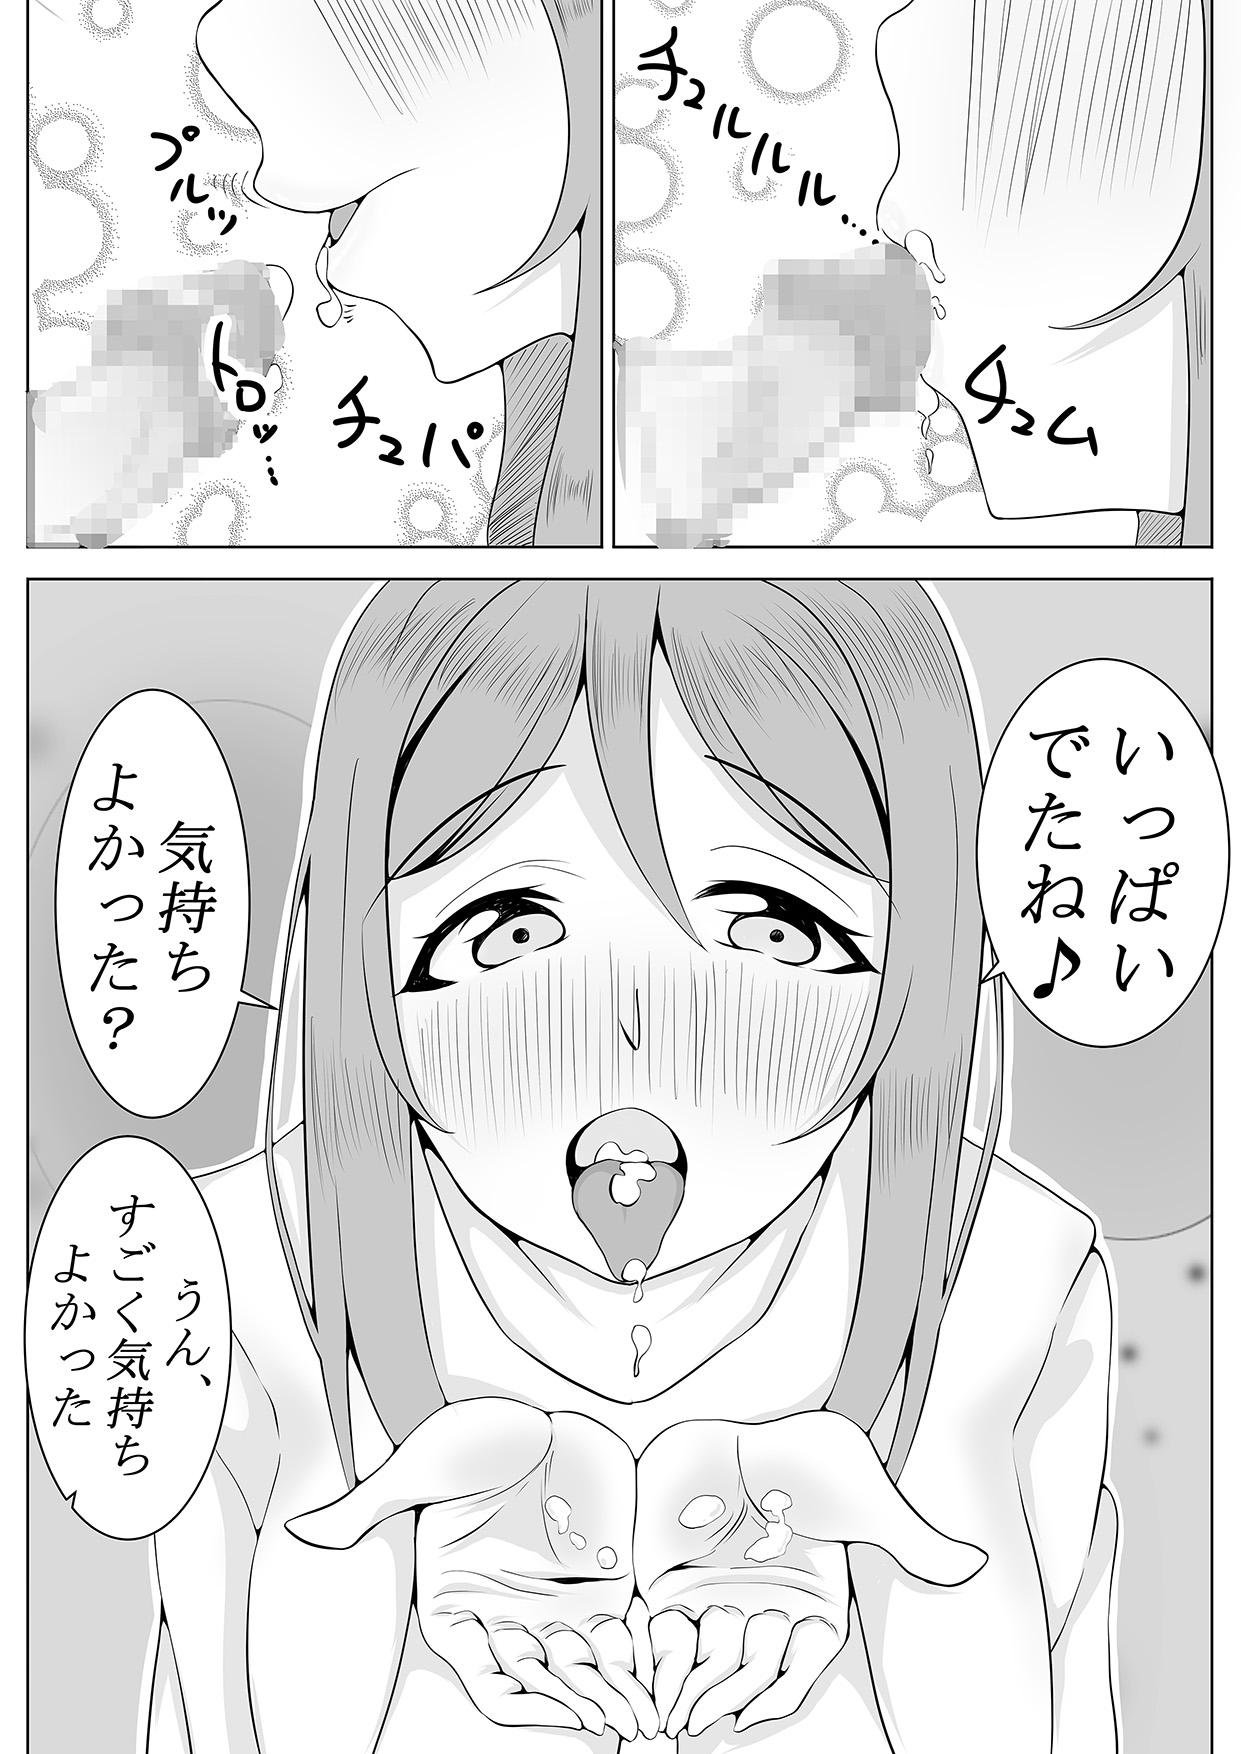 Chica 小さい子、お預かりします。 We take care of a small boy - Love live sunshine Swingers - Page 11